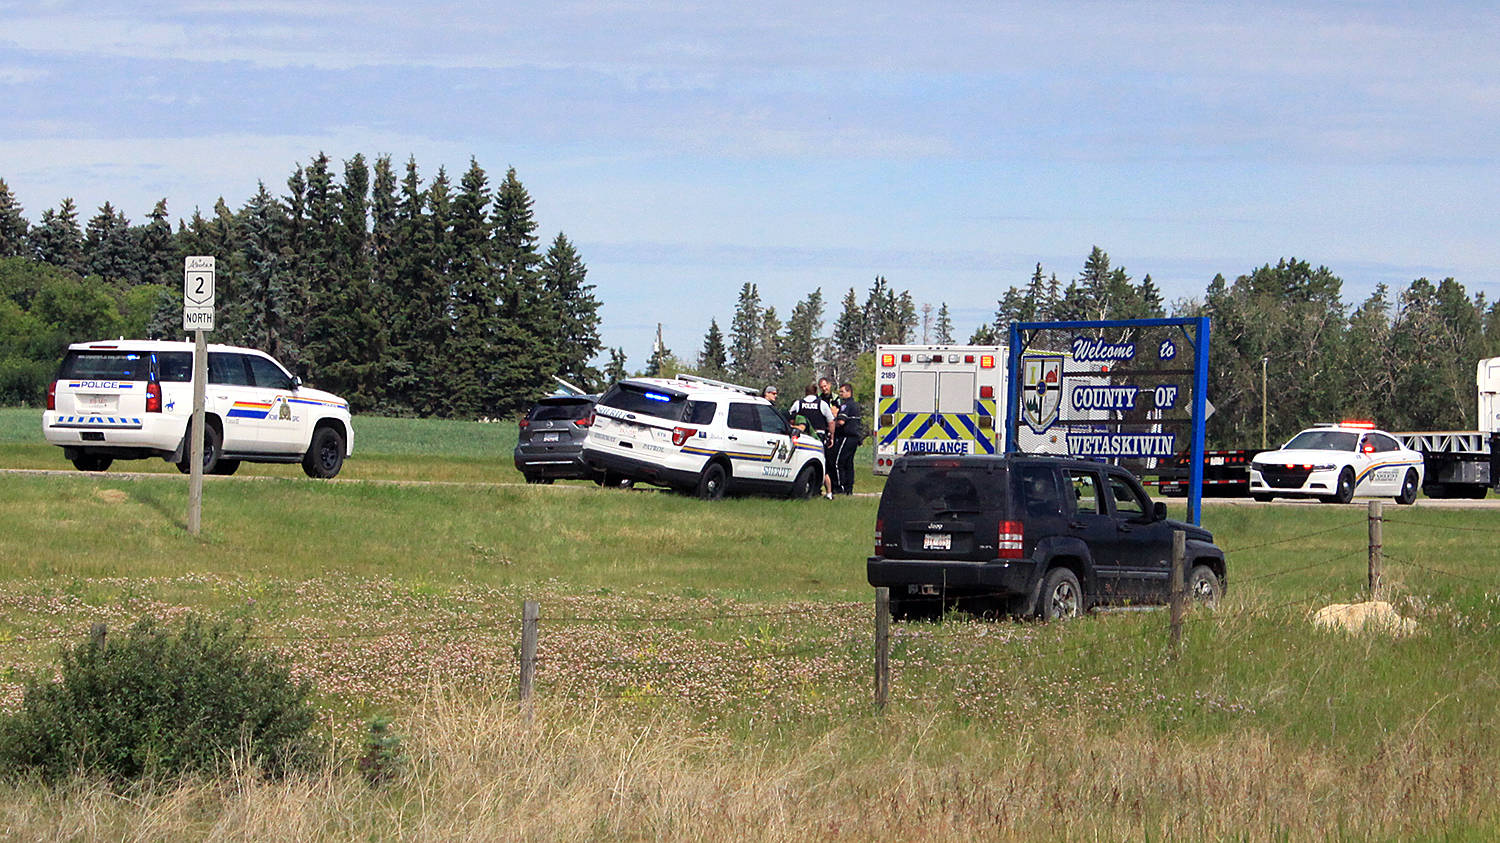 Members of the Ponoka Integrated Traffic Unit speak to witnesses at the scene of a strange incident July 12 just north of Secondary Highway 611 on Highway 2. A woman drove her vehicle into the ditch and then ran onto the highway, narrowly escaping being run over. Photo by Jordie Dwyer